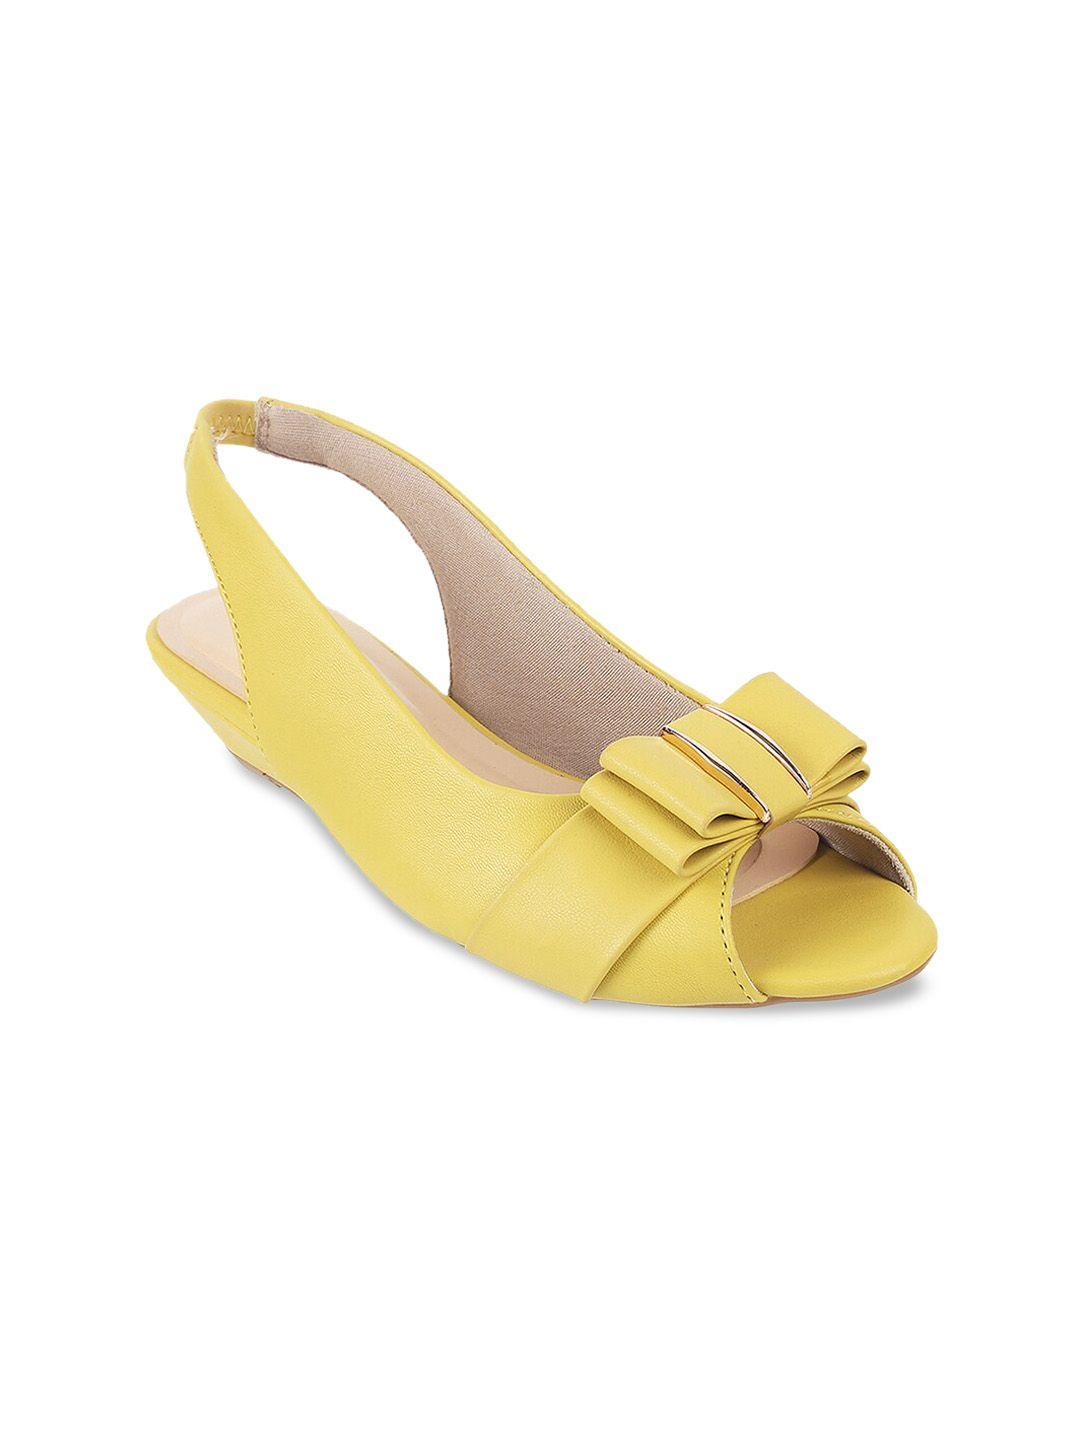 Mochi Wedge Peep Toes with Bows